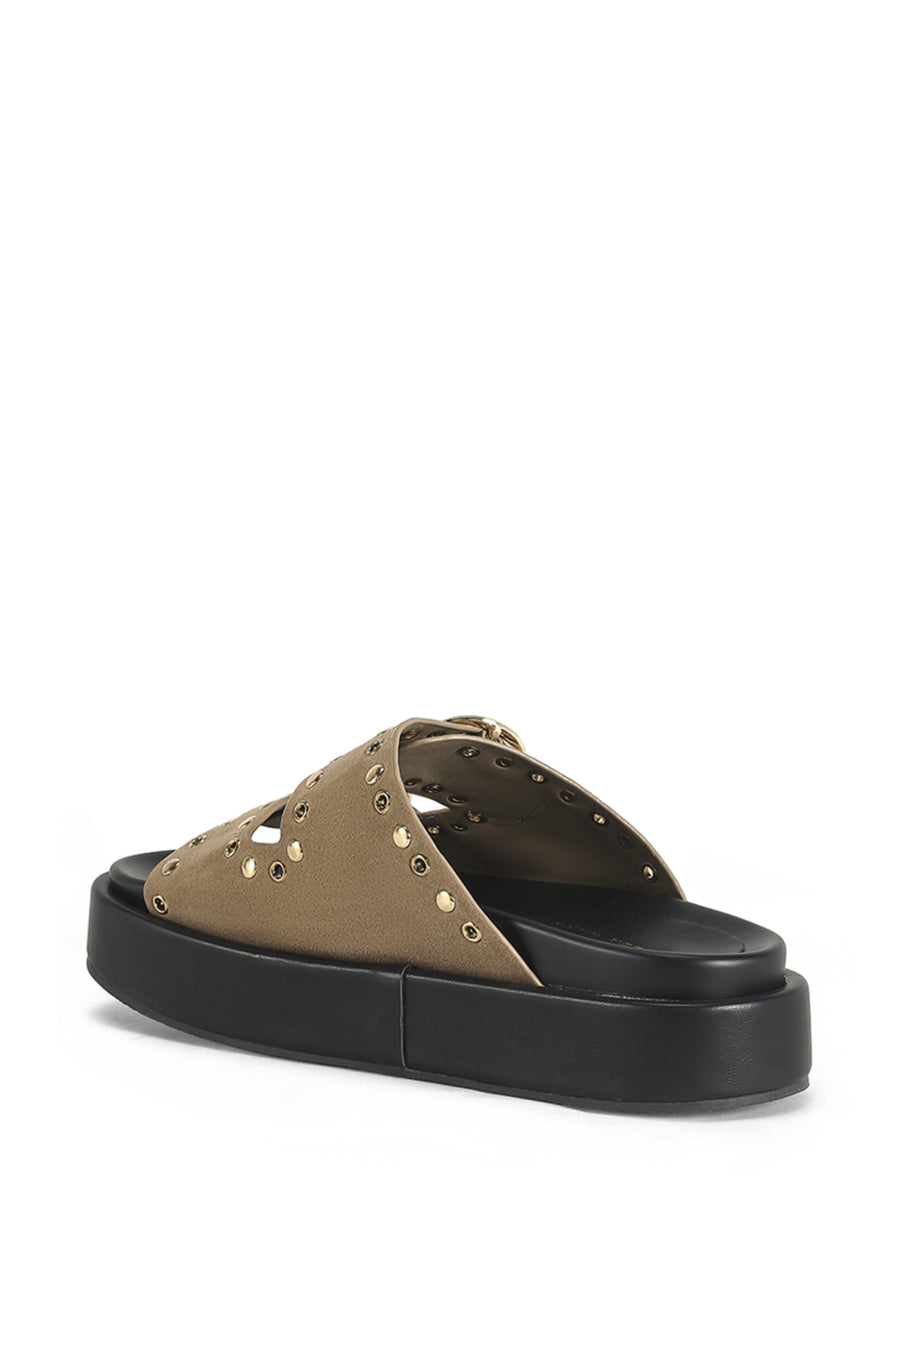 open toe slip on sandals with a slightly platform sole and silver stud accents along the straps